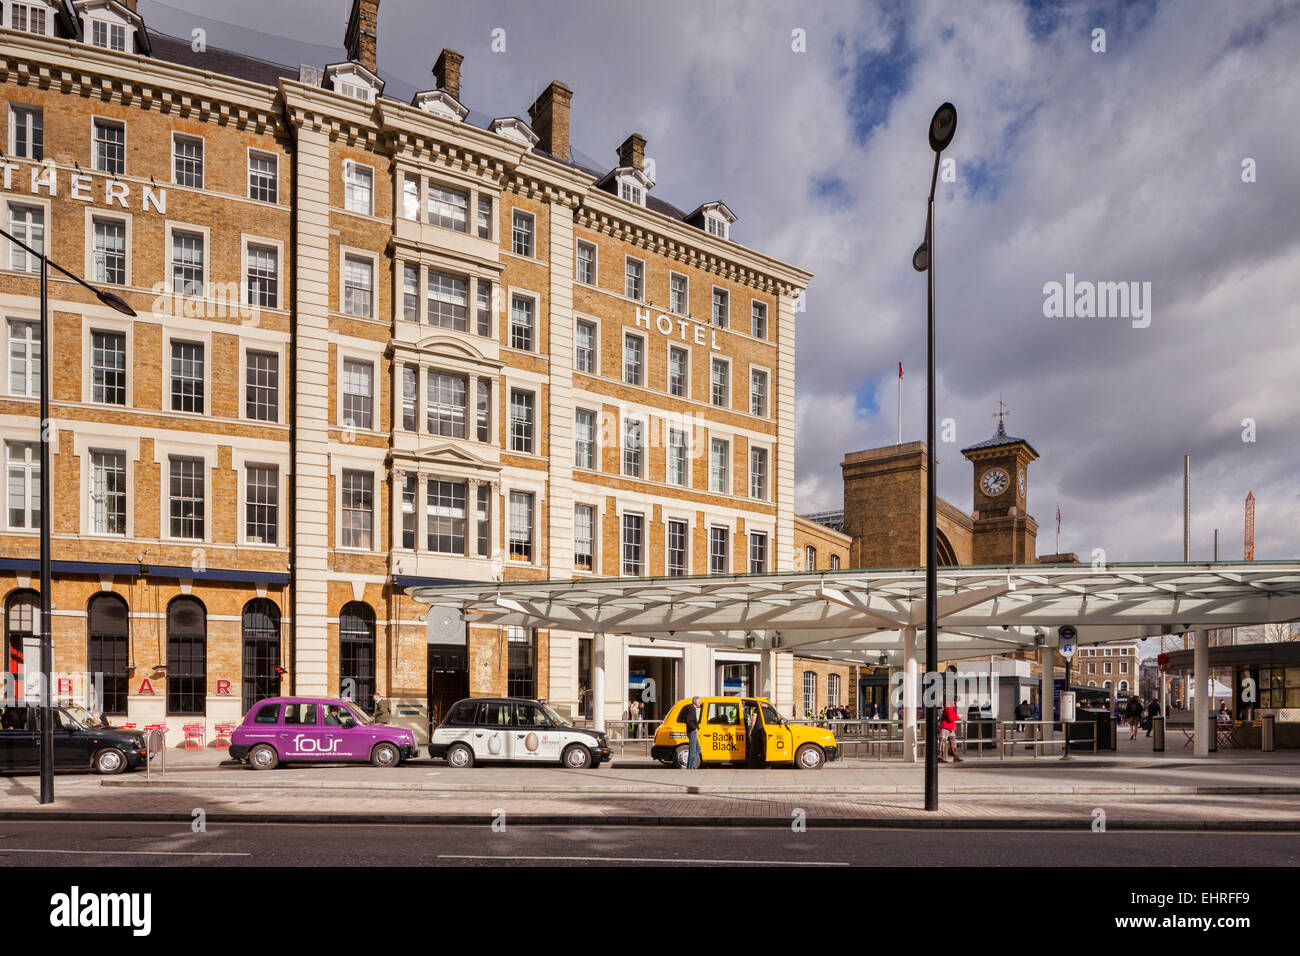 Great Northern Hotel and London Taxis, King's Cross, London, England, UK. Stock Photo